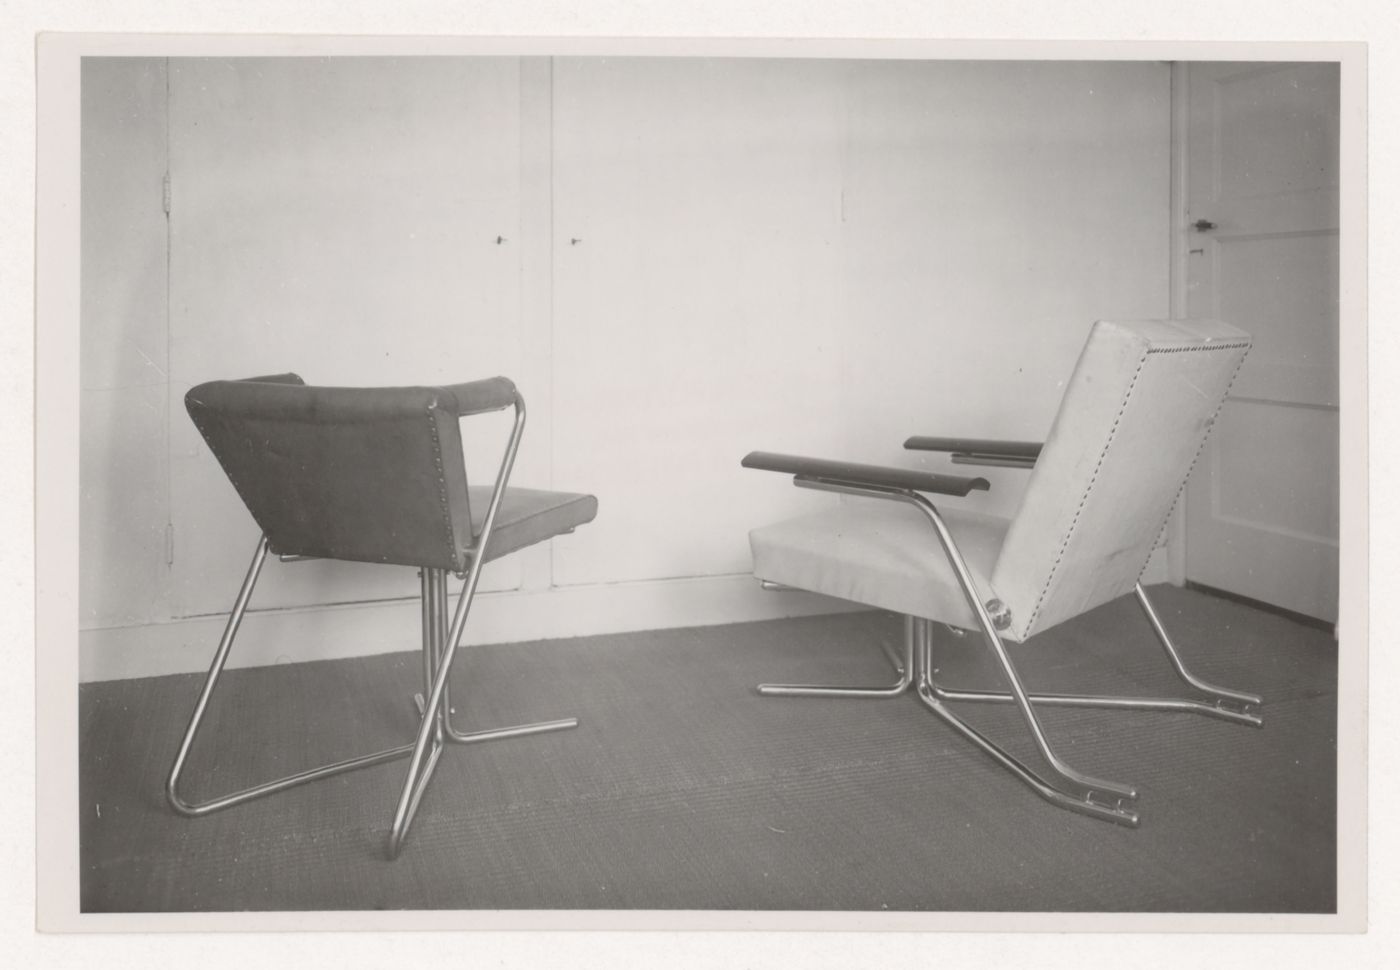 View of elbow chairs designed by J.J.P. Oud for Metz & Co., Amsterdam, Netherlands